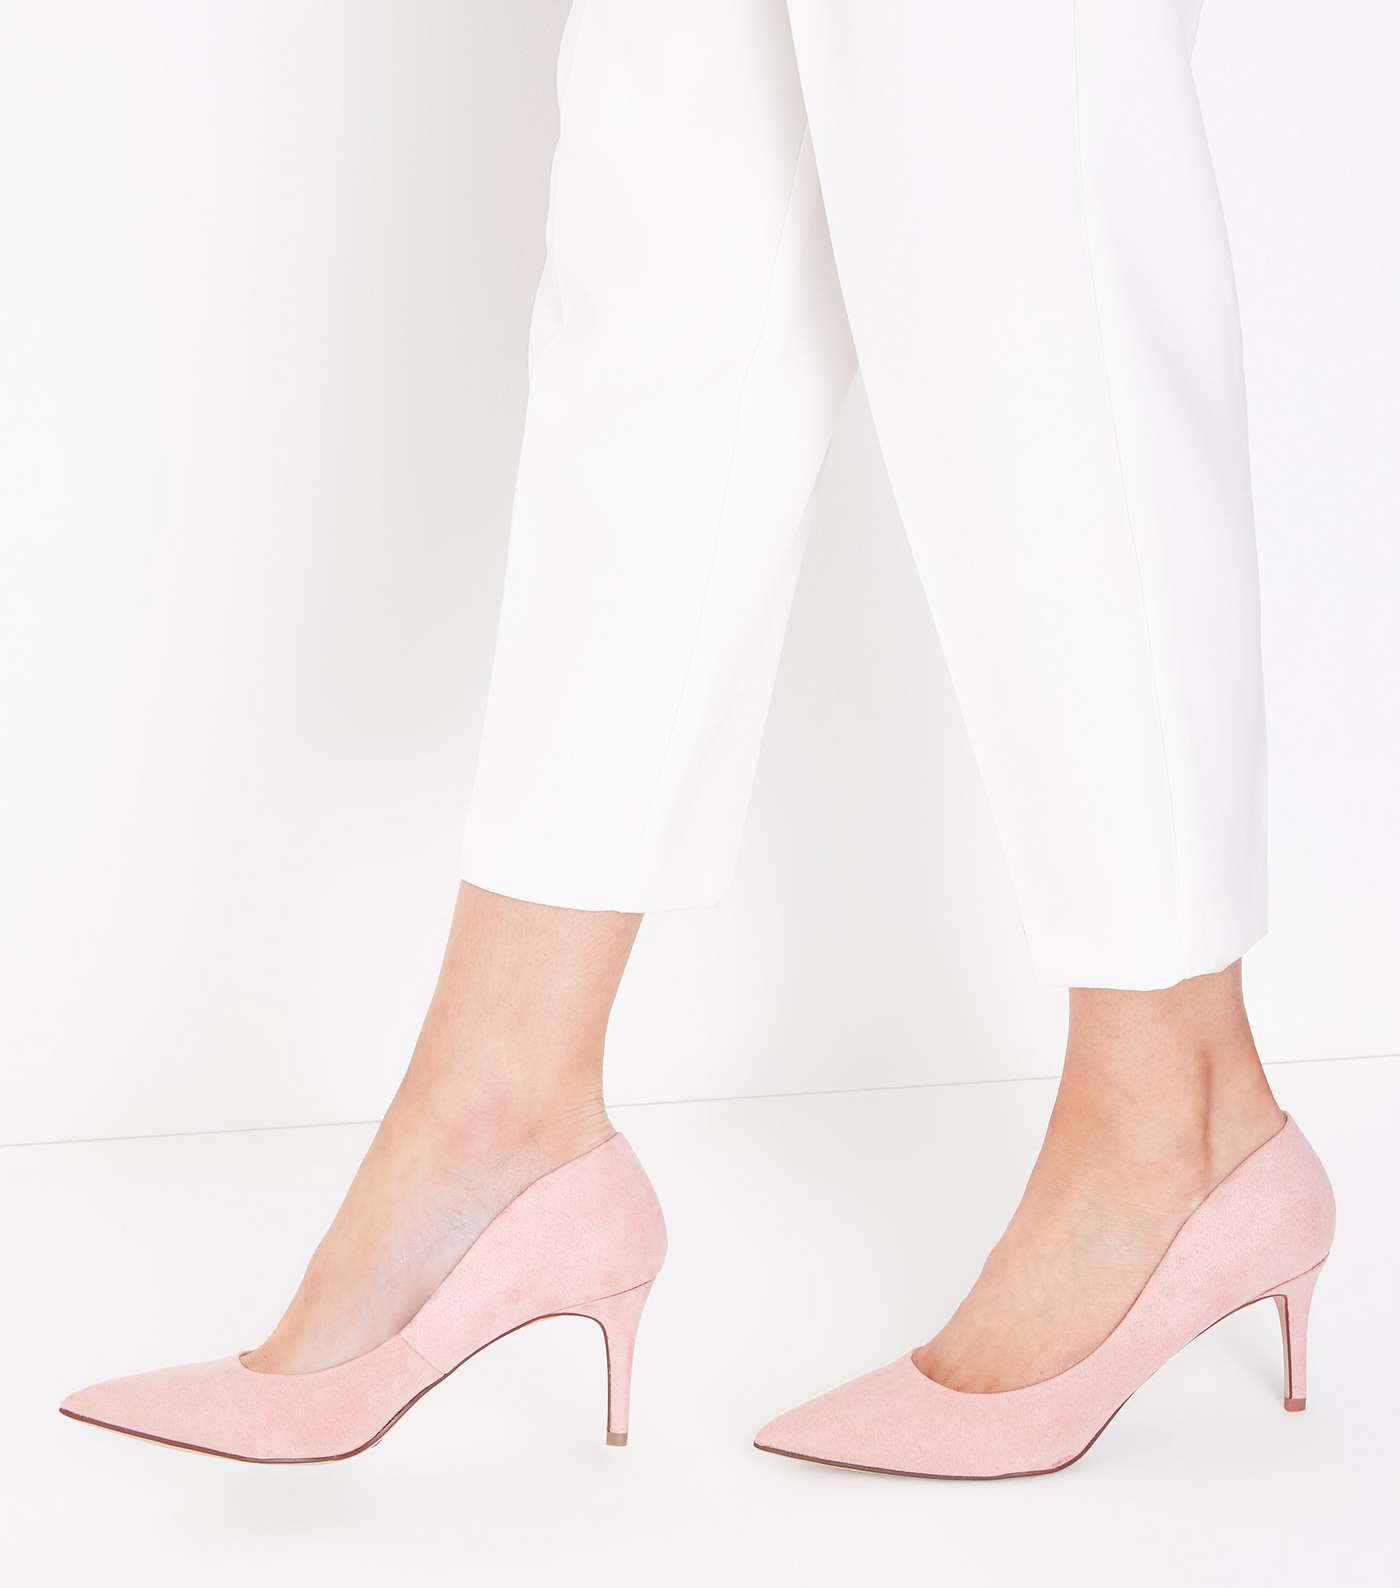 Nude Suedette Mid Heel Court Shoes Image 2